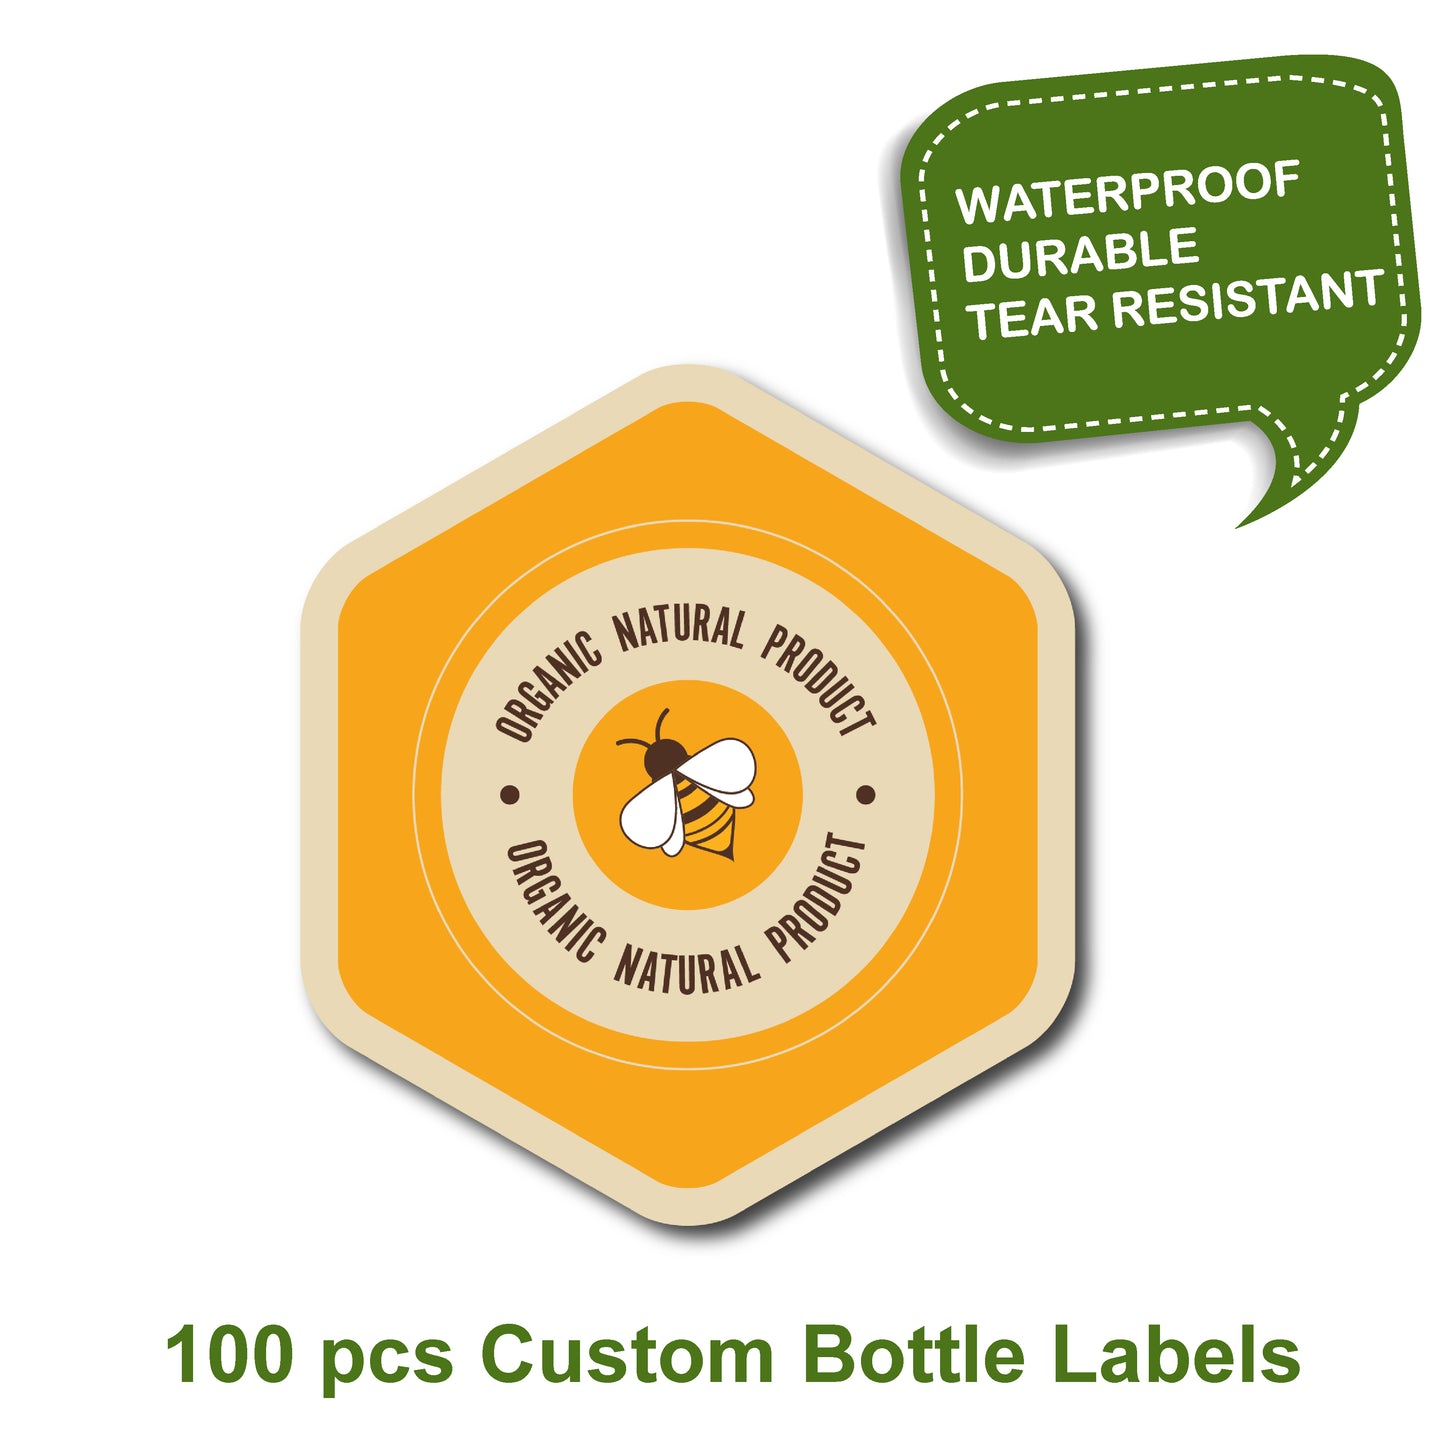 Custom stickers, stickers, Organic natural product label, 100 pcs Custom bottle labels, custom maple syrup label, custom label, custom candle label, custom product label, labels